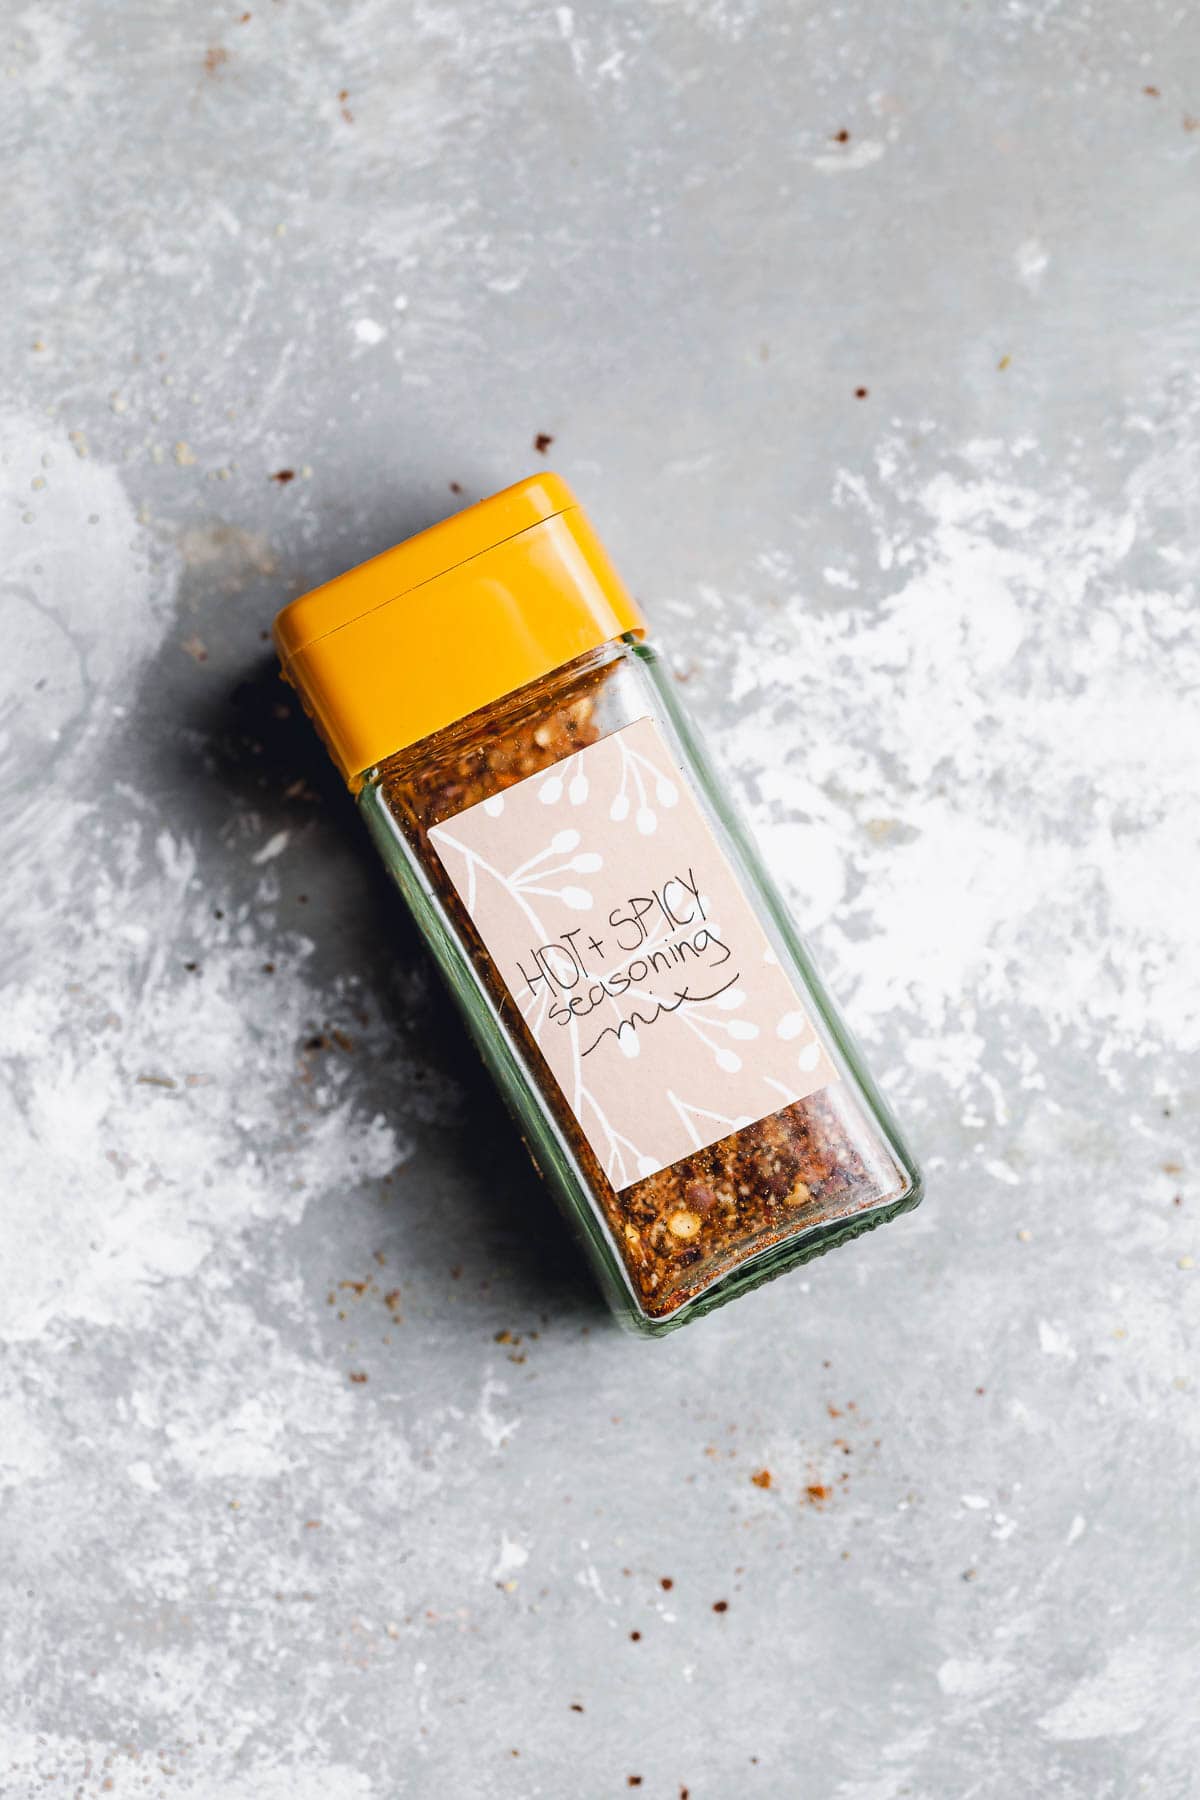 A Hot & Spicy seasoning mix placed lying down on a flat surface.